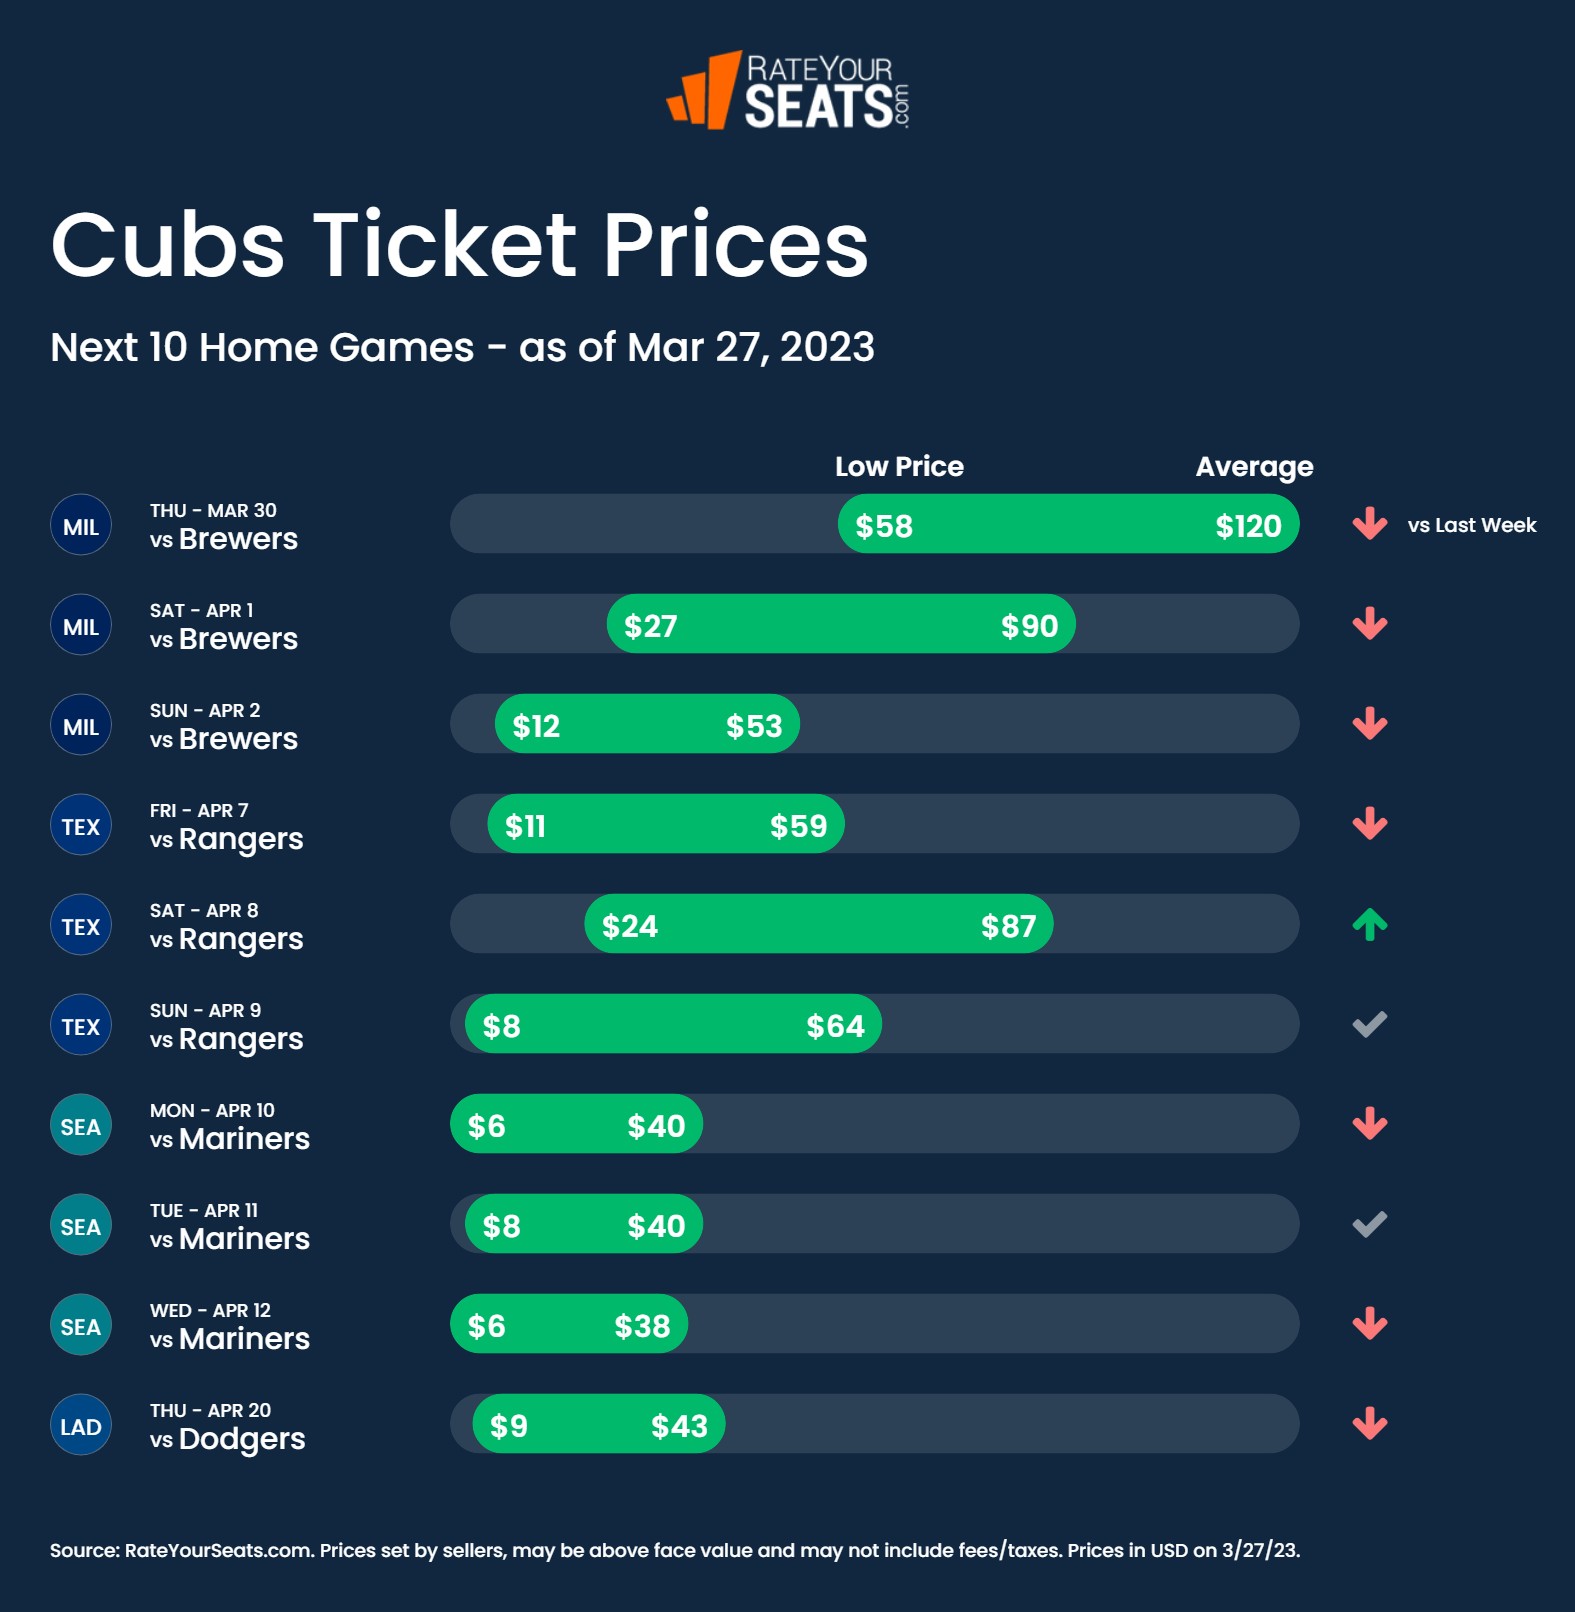 Cubs tickets pricing week of March 27 2023